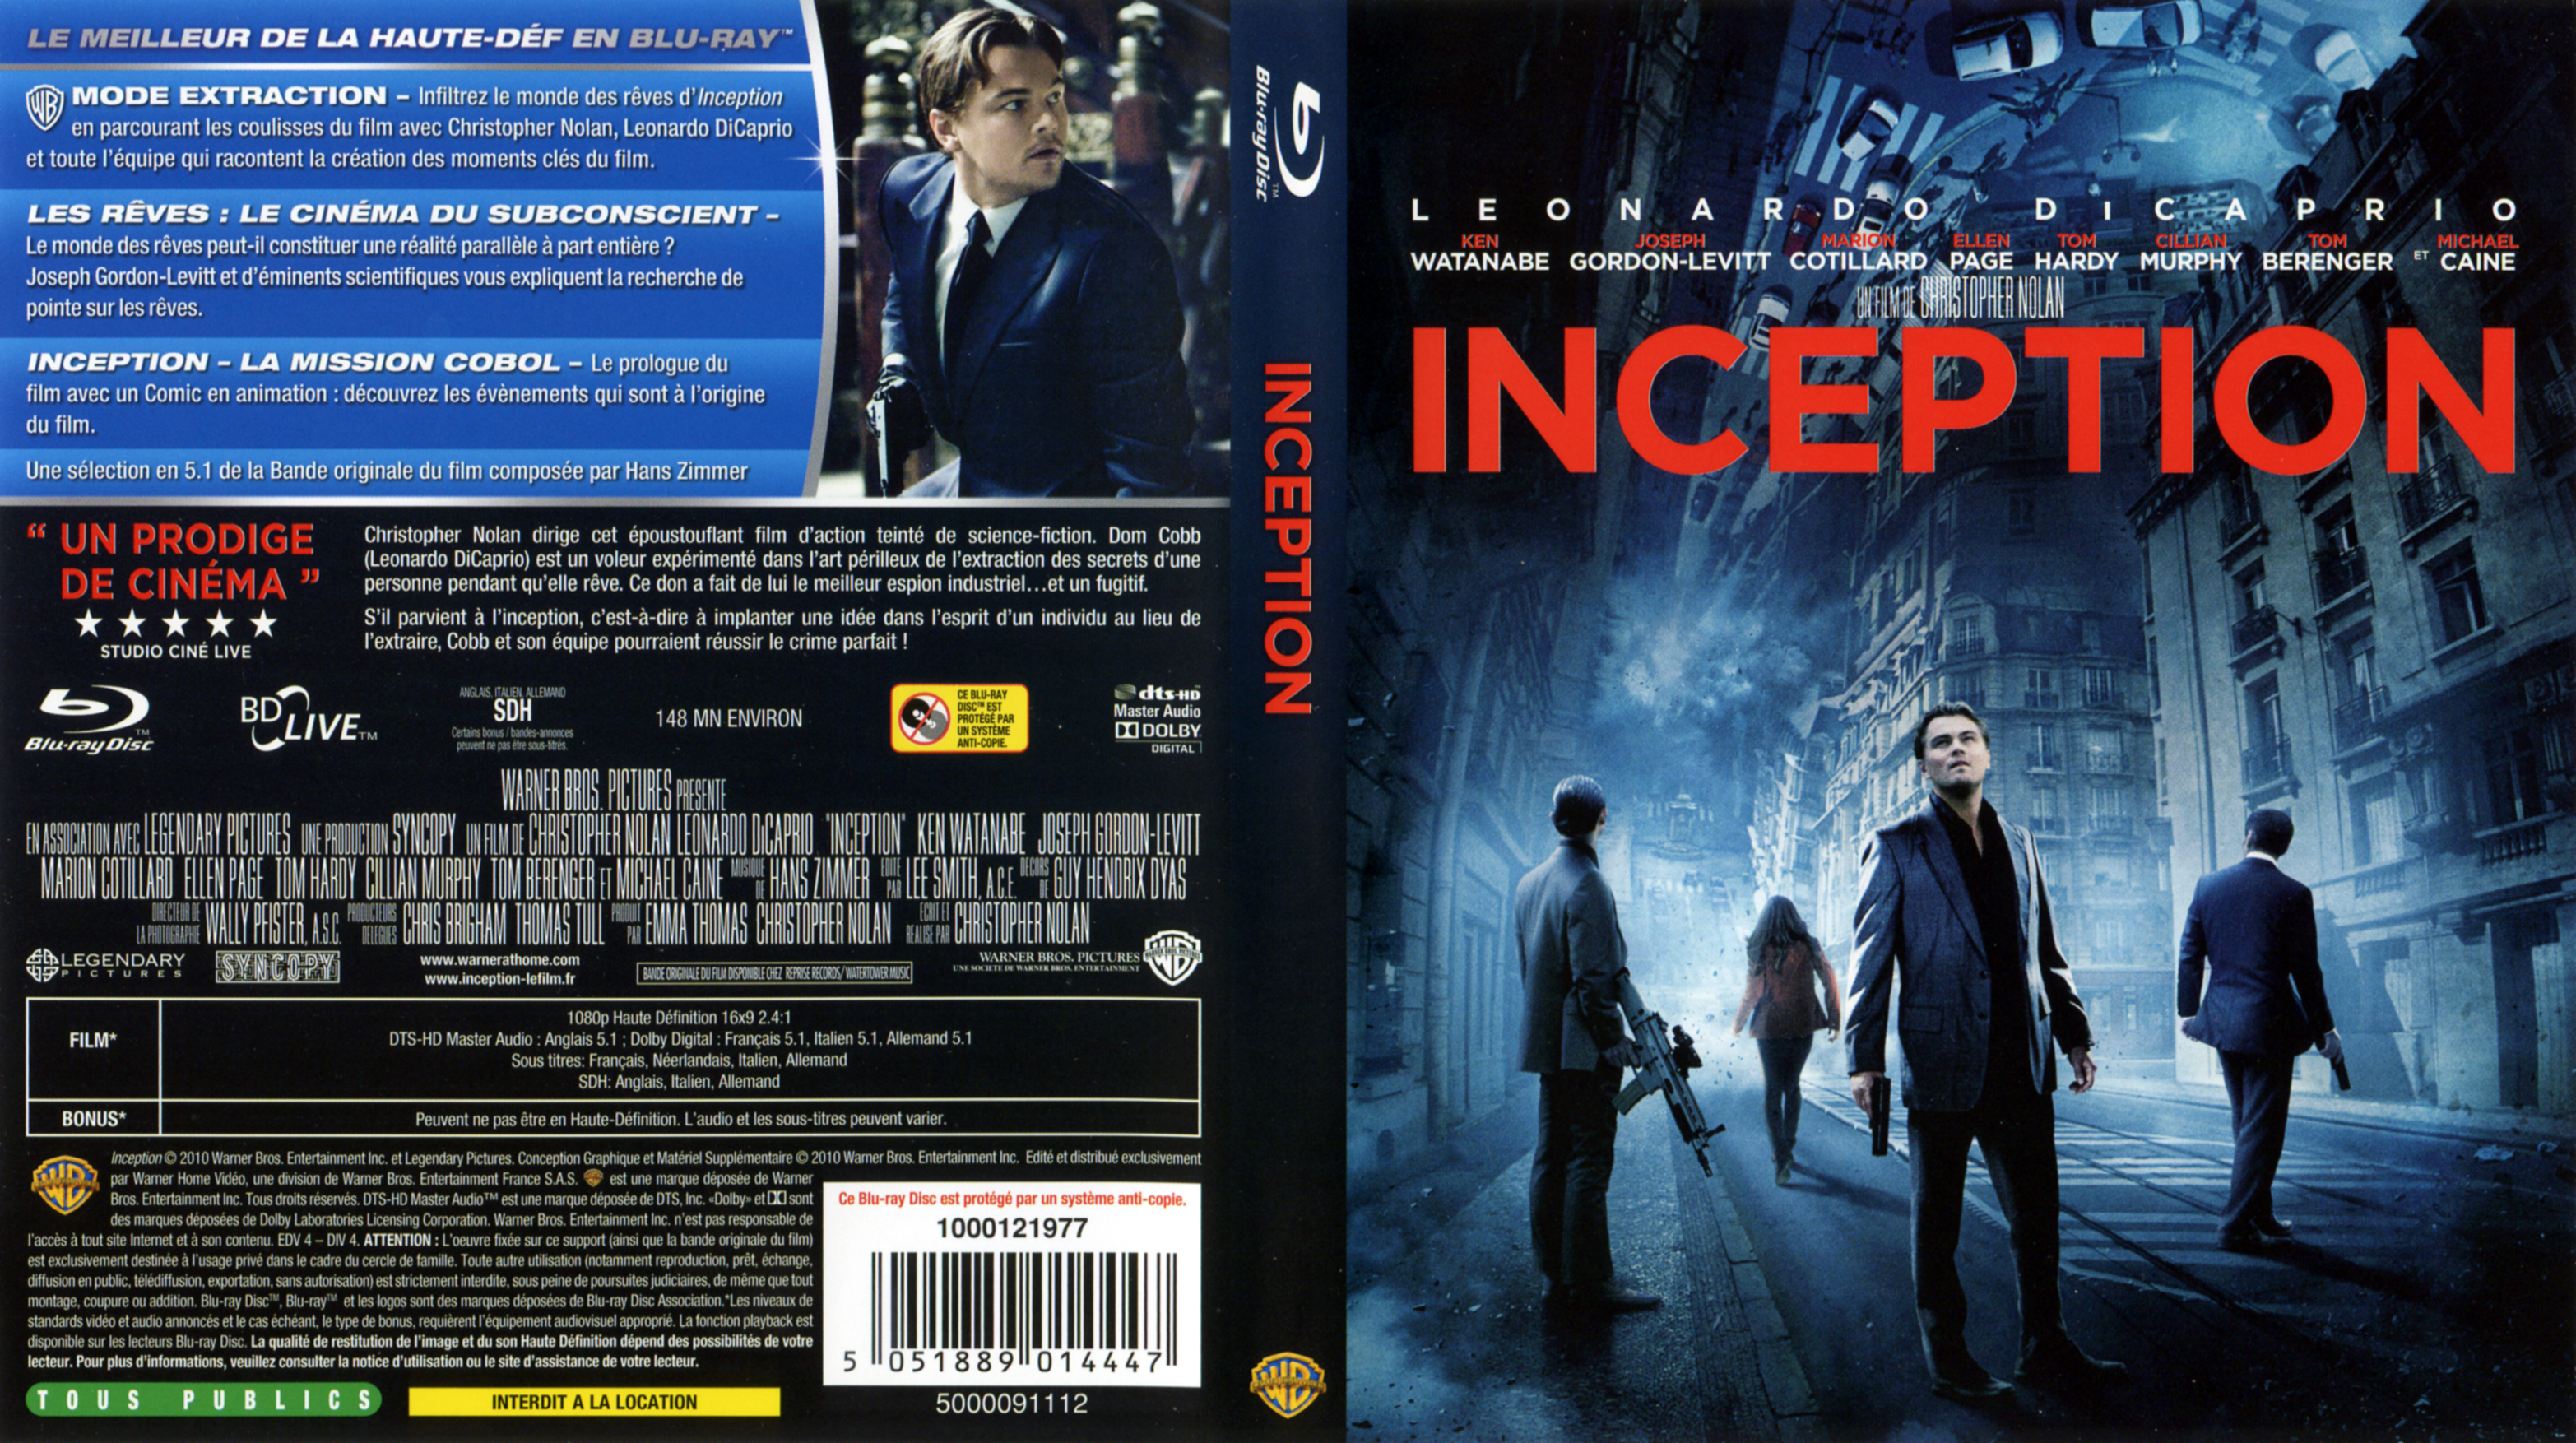 Jaquette DVD Inception (BLU-RAY) v3